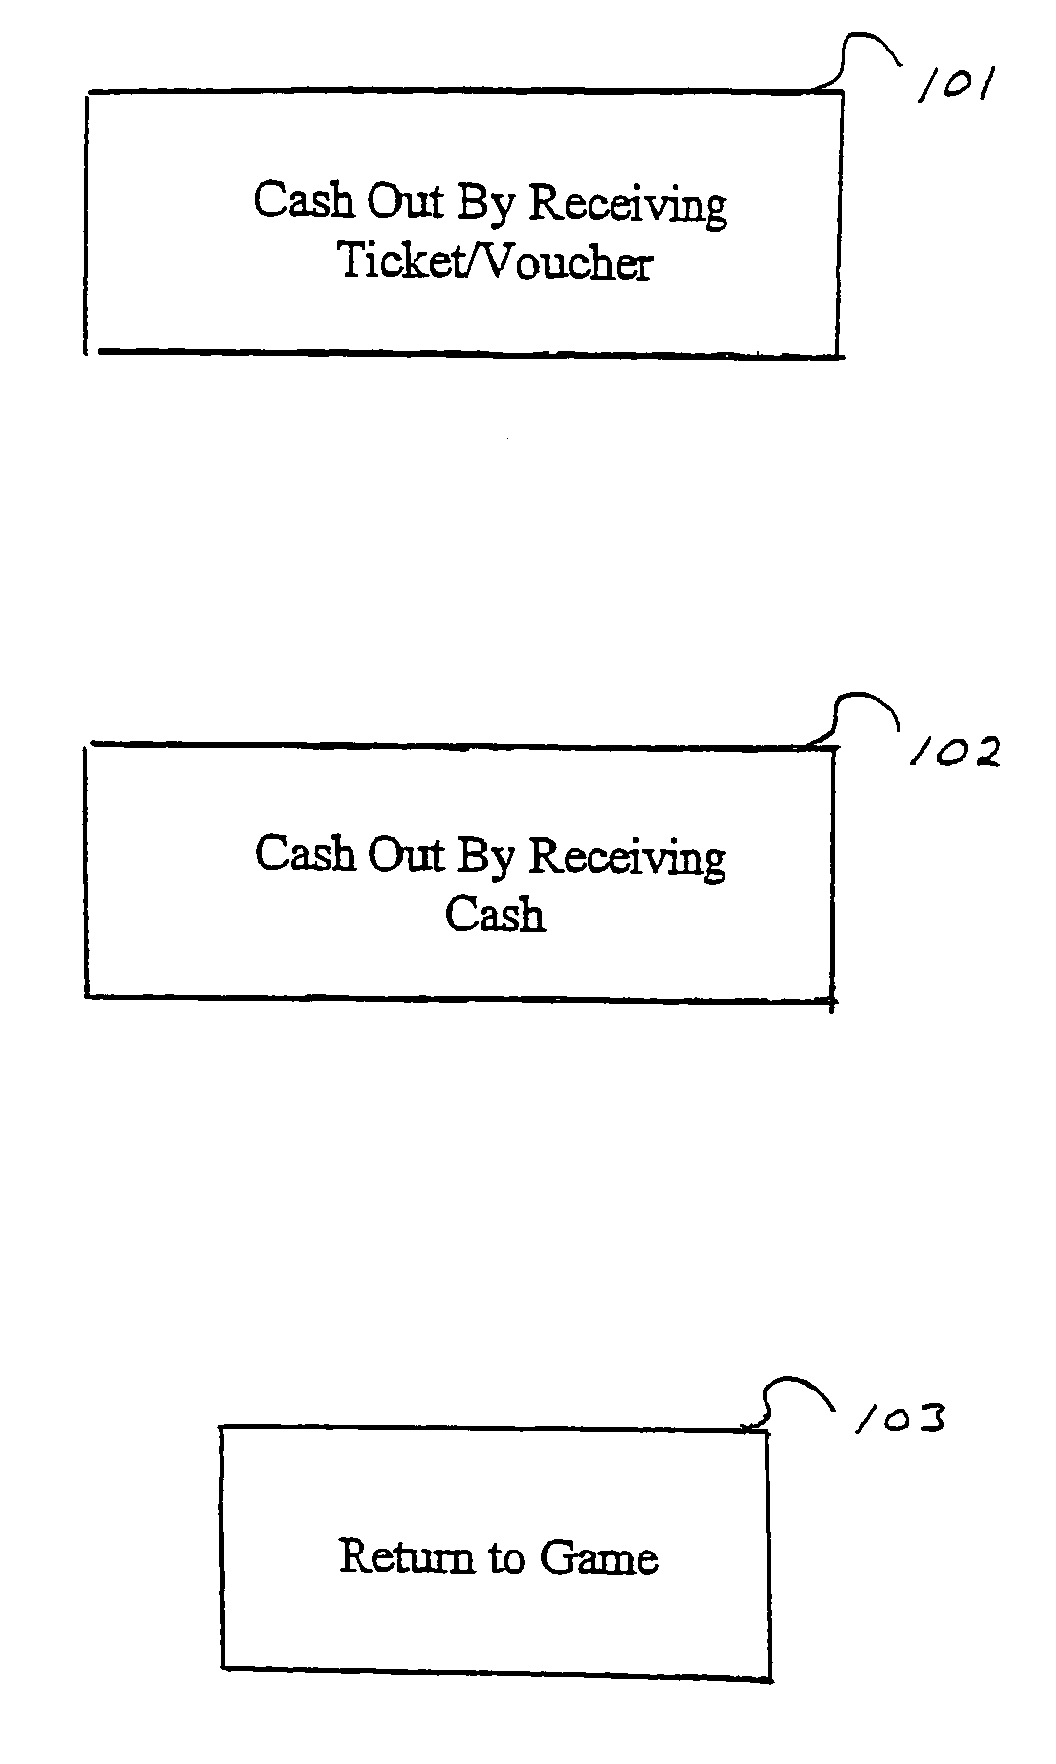 Video gaming device having a system and method for completing wagers and purchases during the cash out process